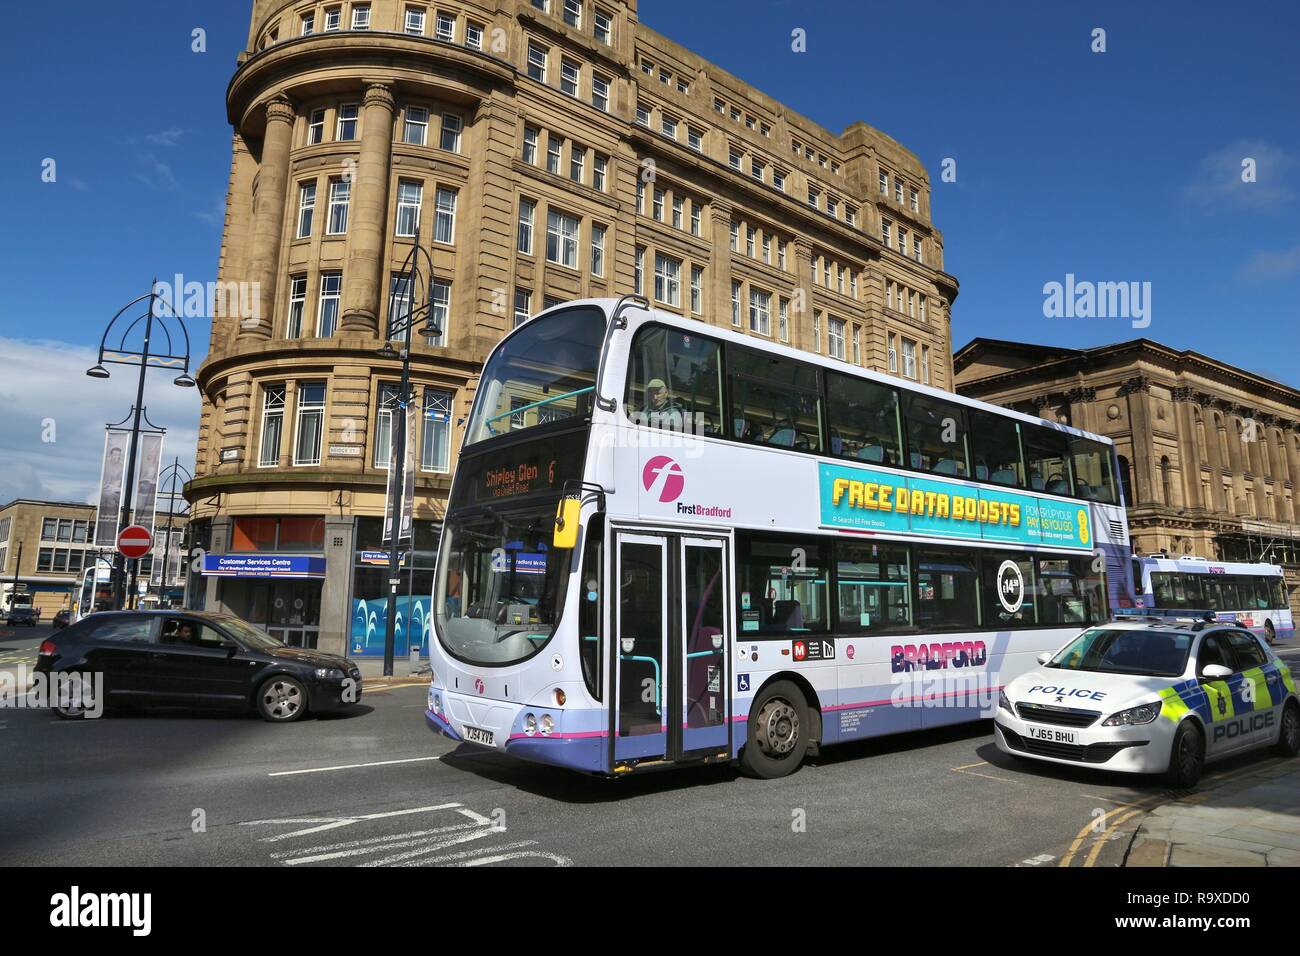 BRADFORD, UK - JULY 11, 2016: People ride First Bradford double decker bus. FirstGroup employs 124,000 people. Stock Photo